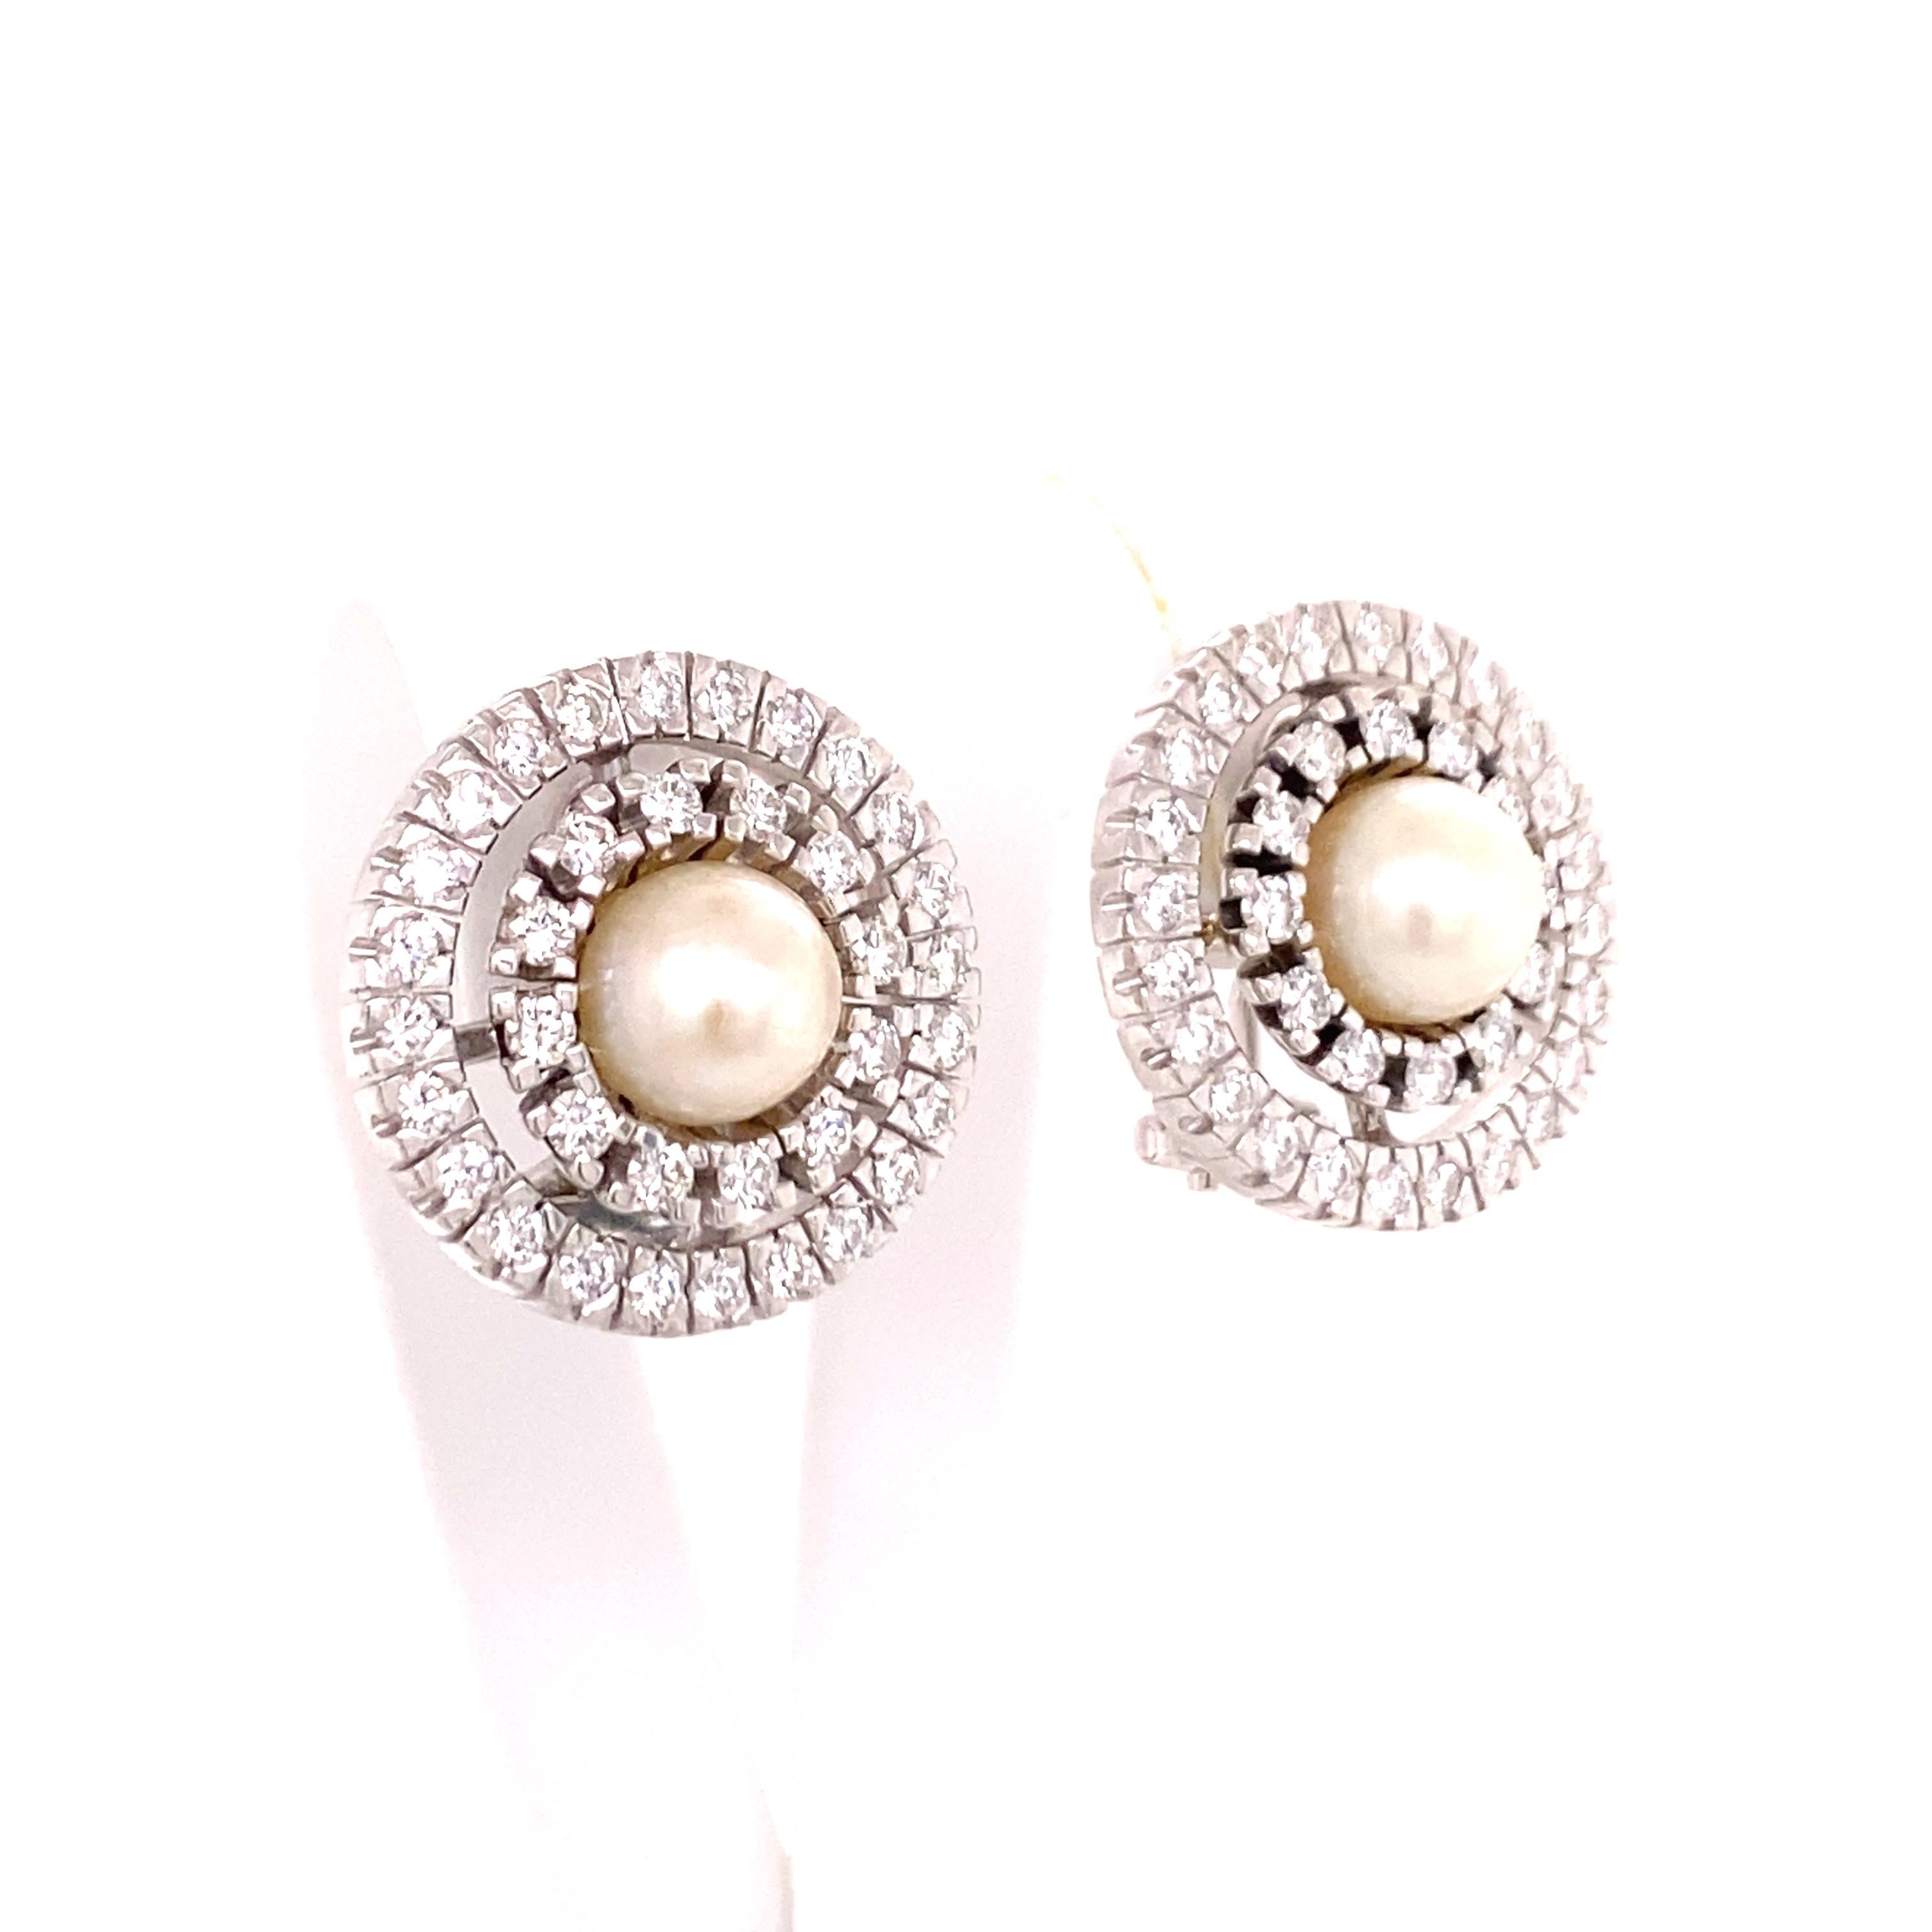 Contemporary Akoya Cultured Pearl and Diamond Earclips in 18 Karat White Gold